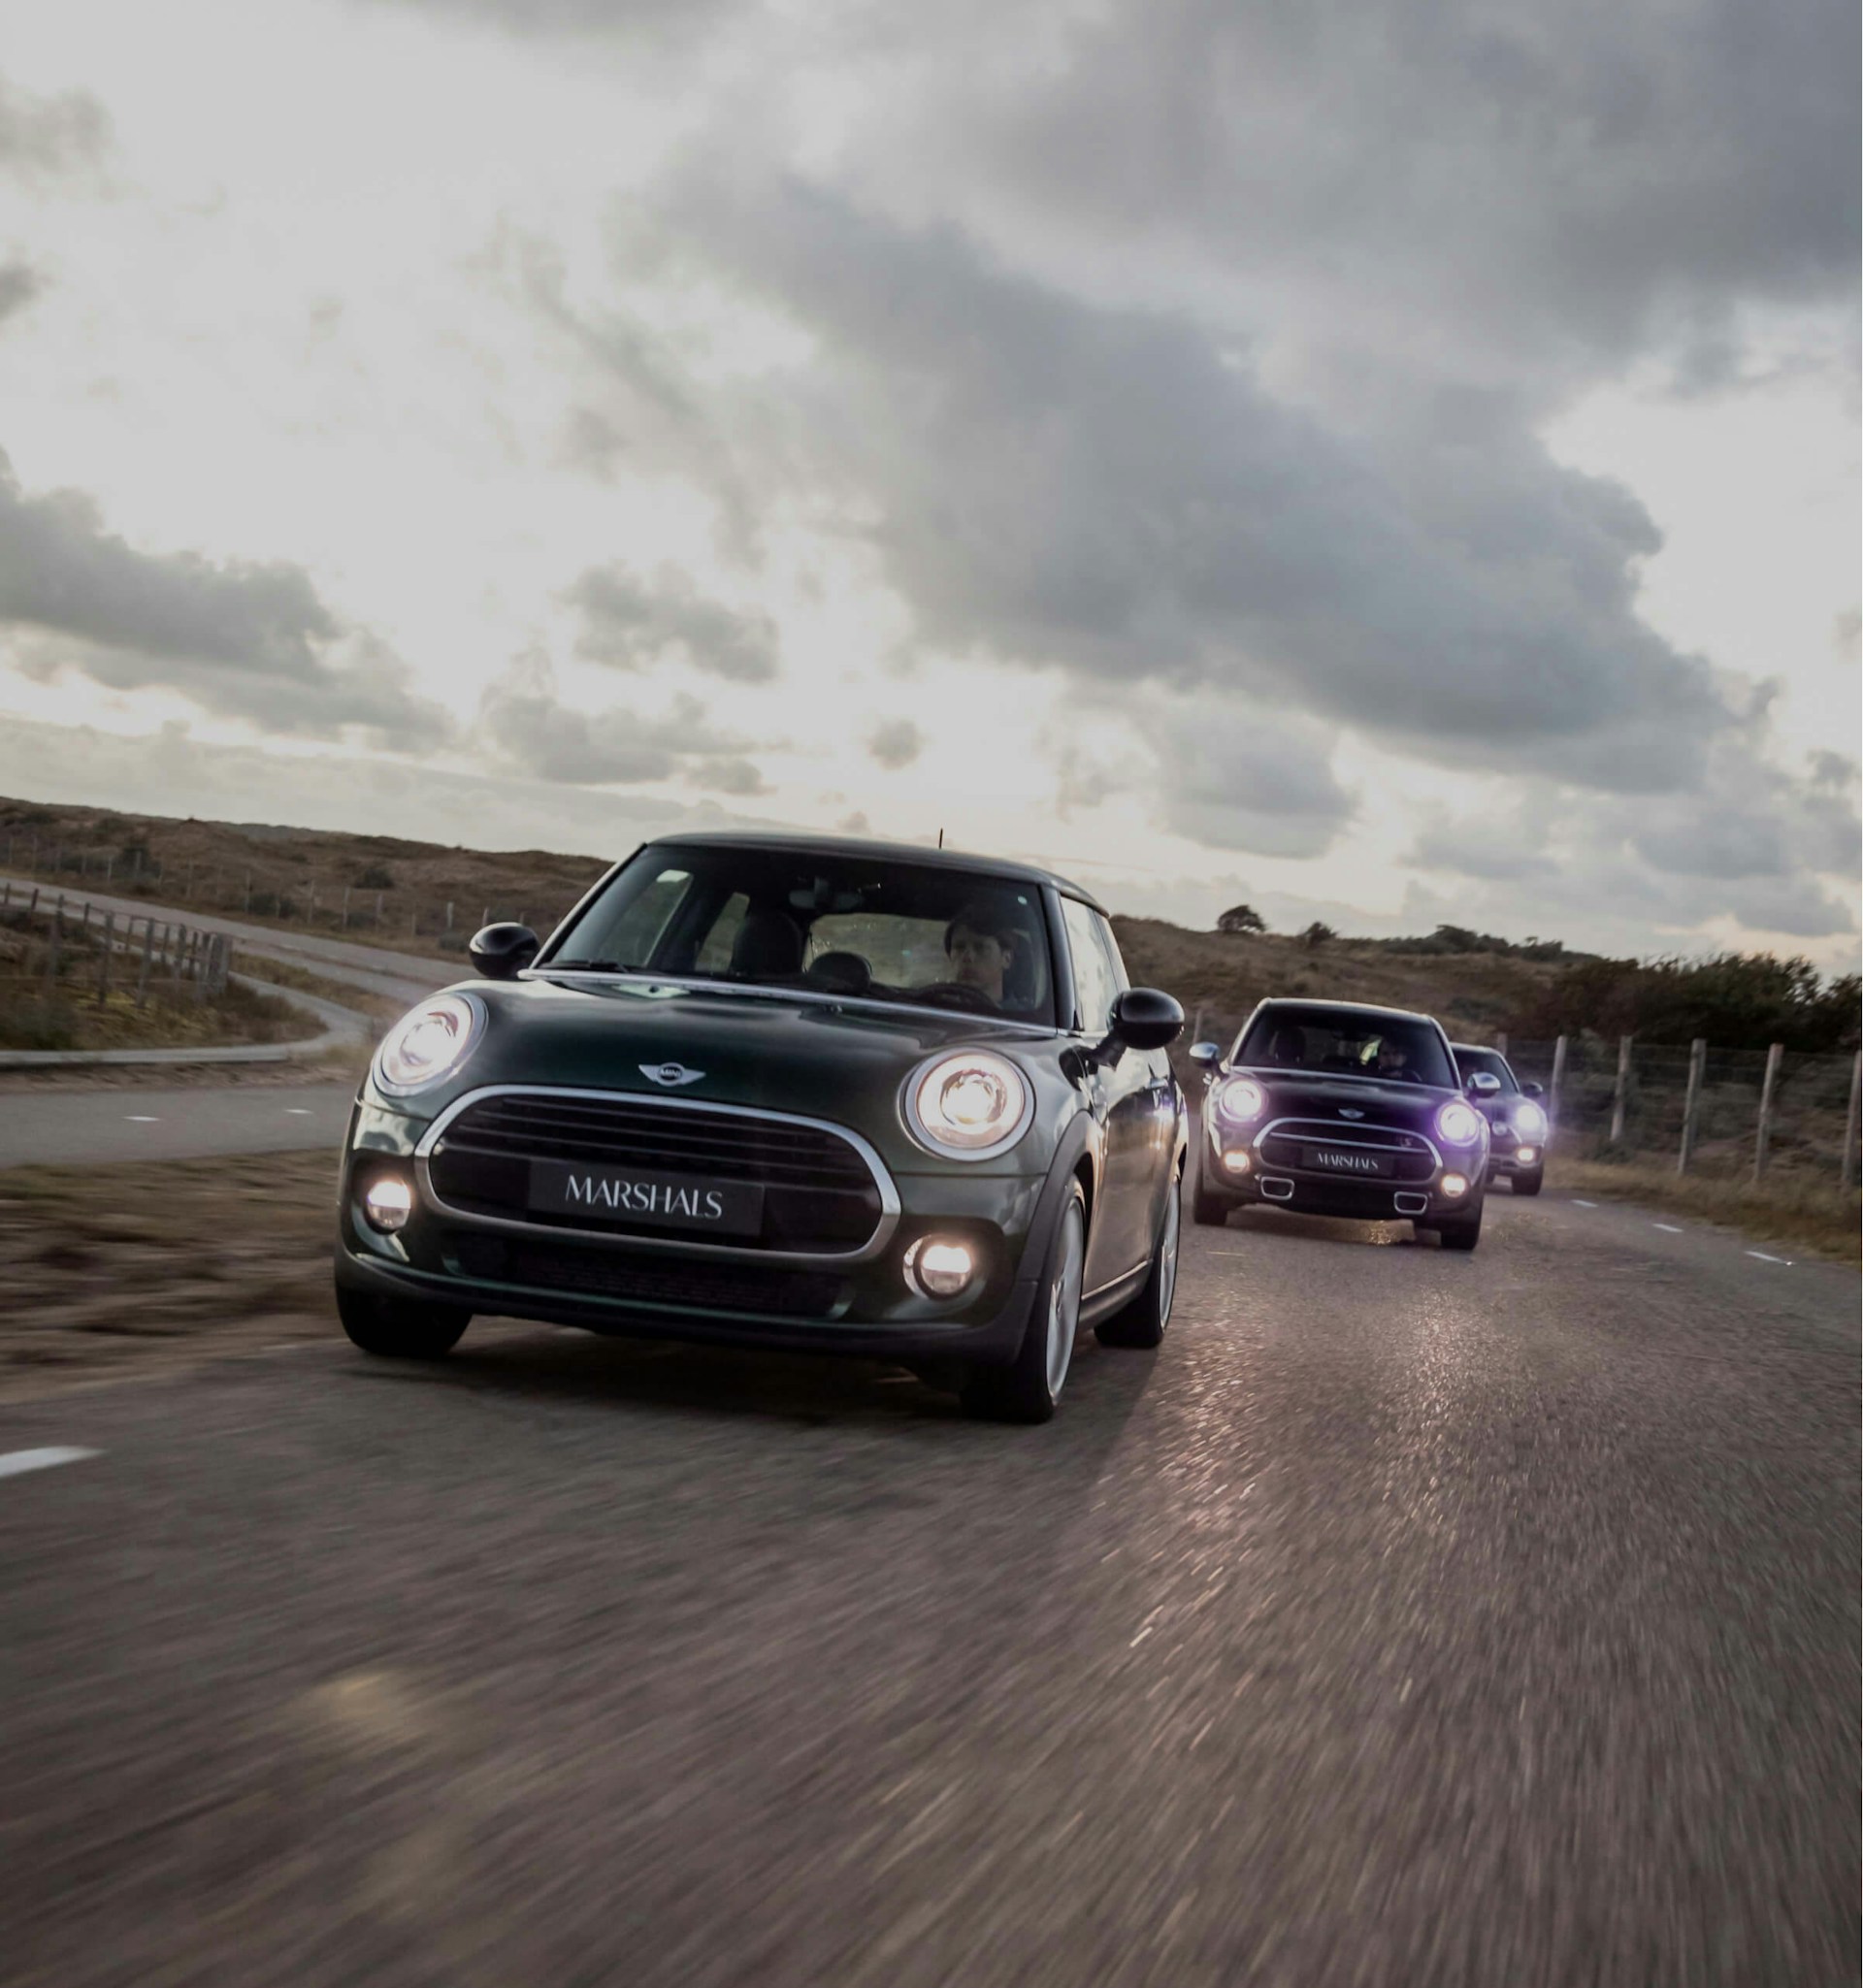 mini-driving-on-theroad-with-custom-plate